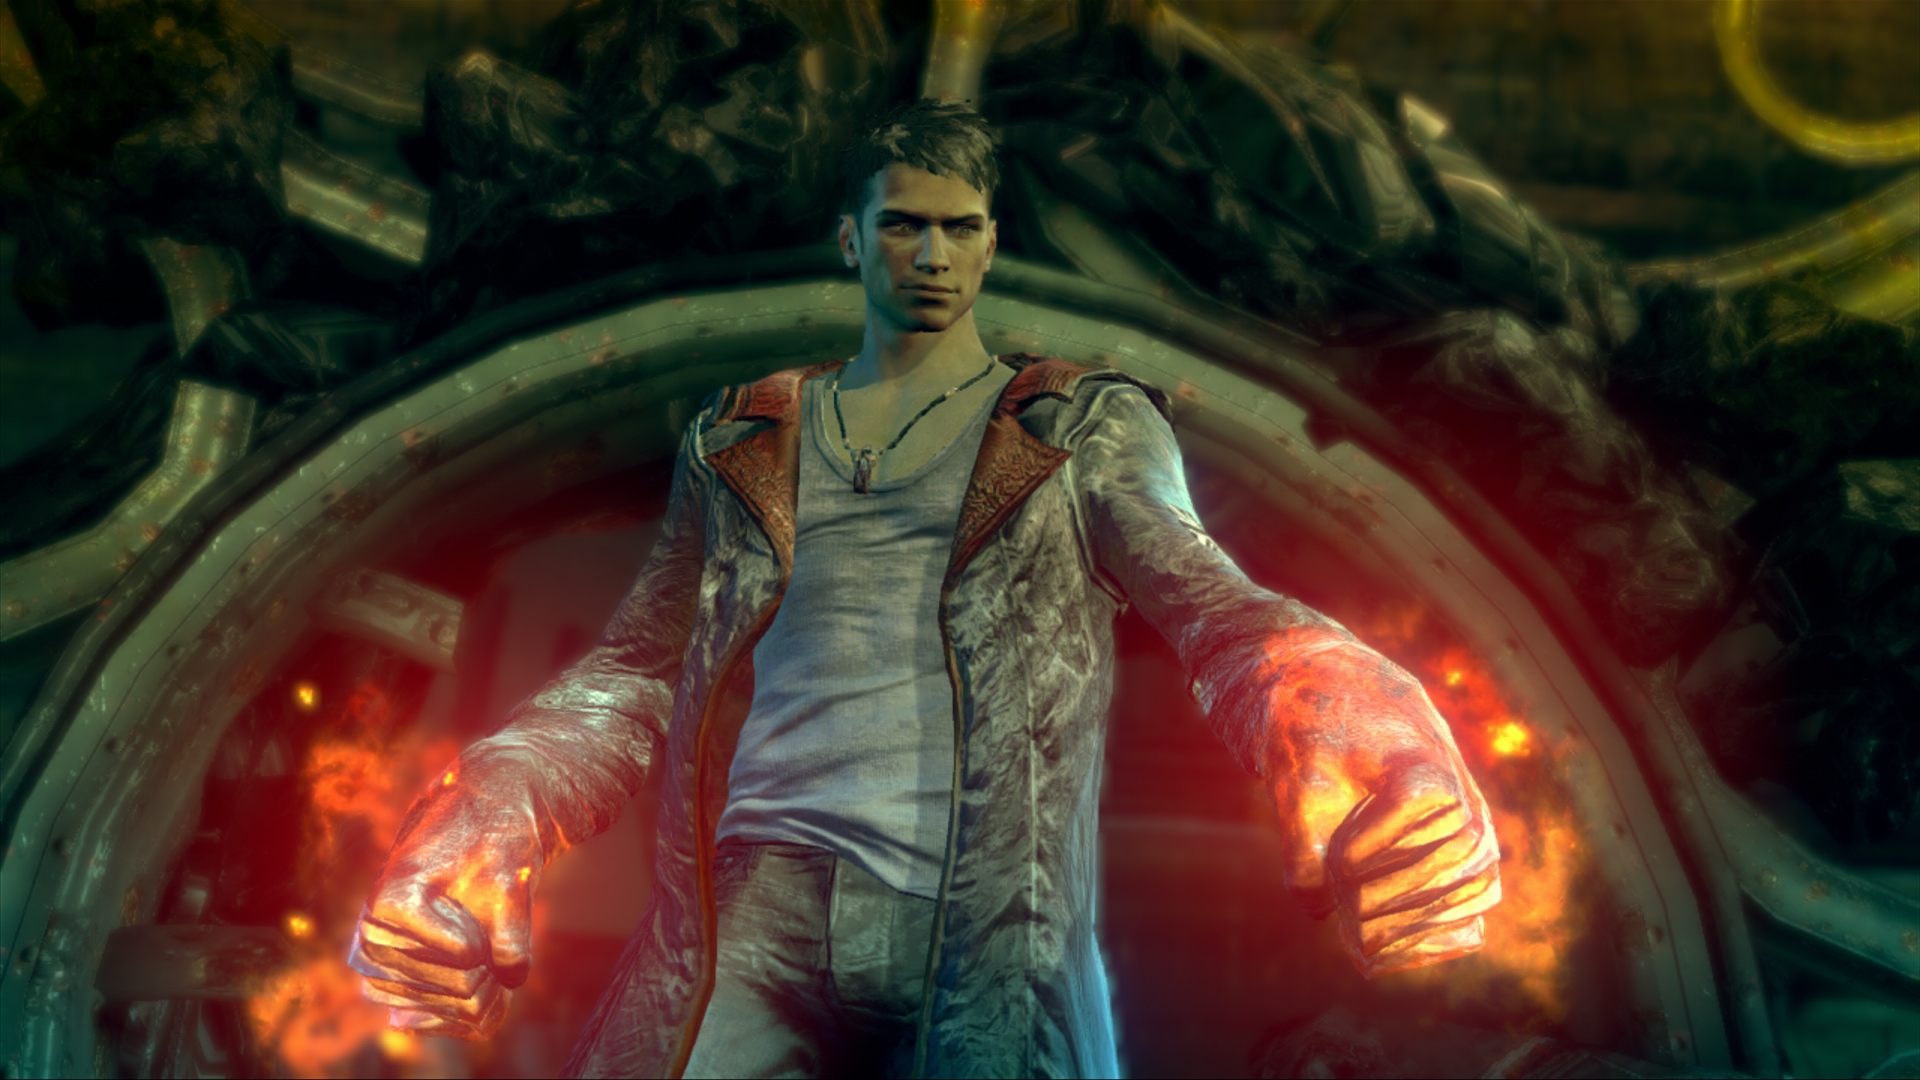 DmC Devil May Cry screenshots show off Dante with new weapons